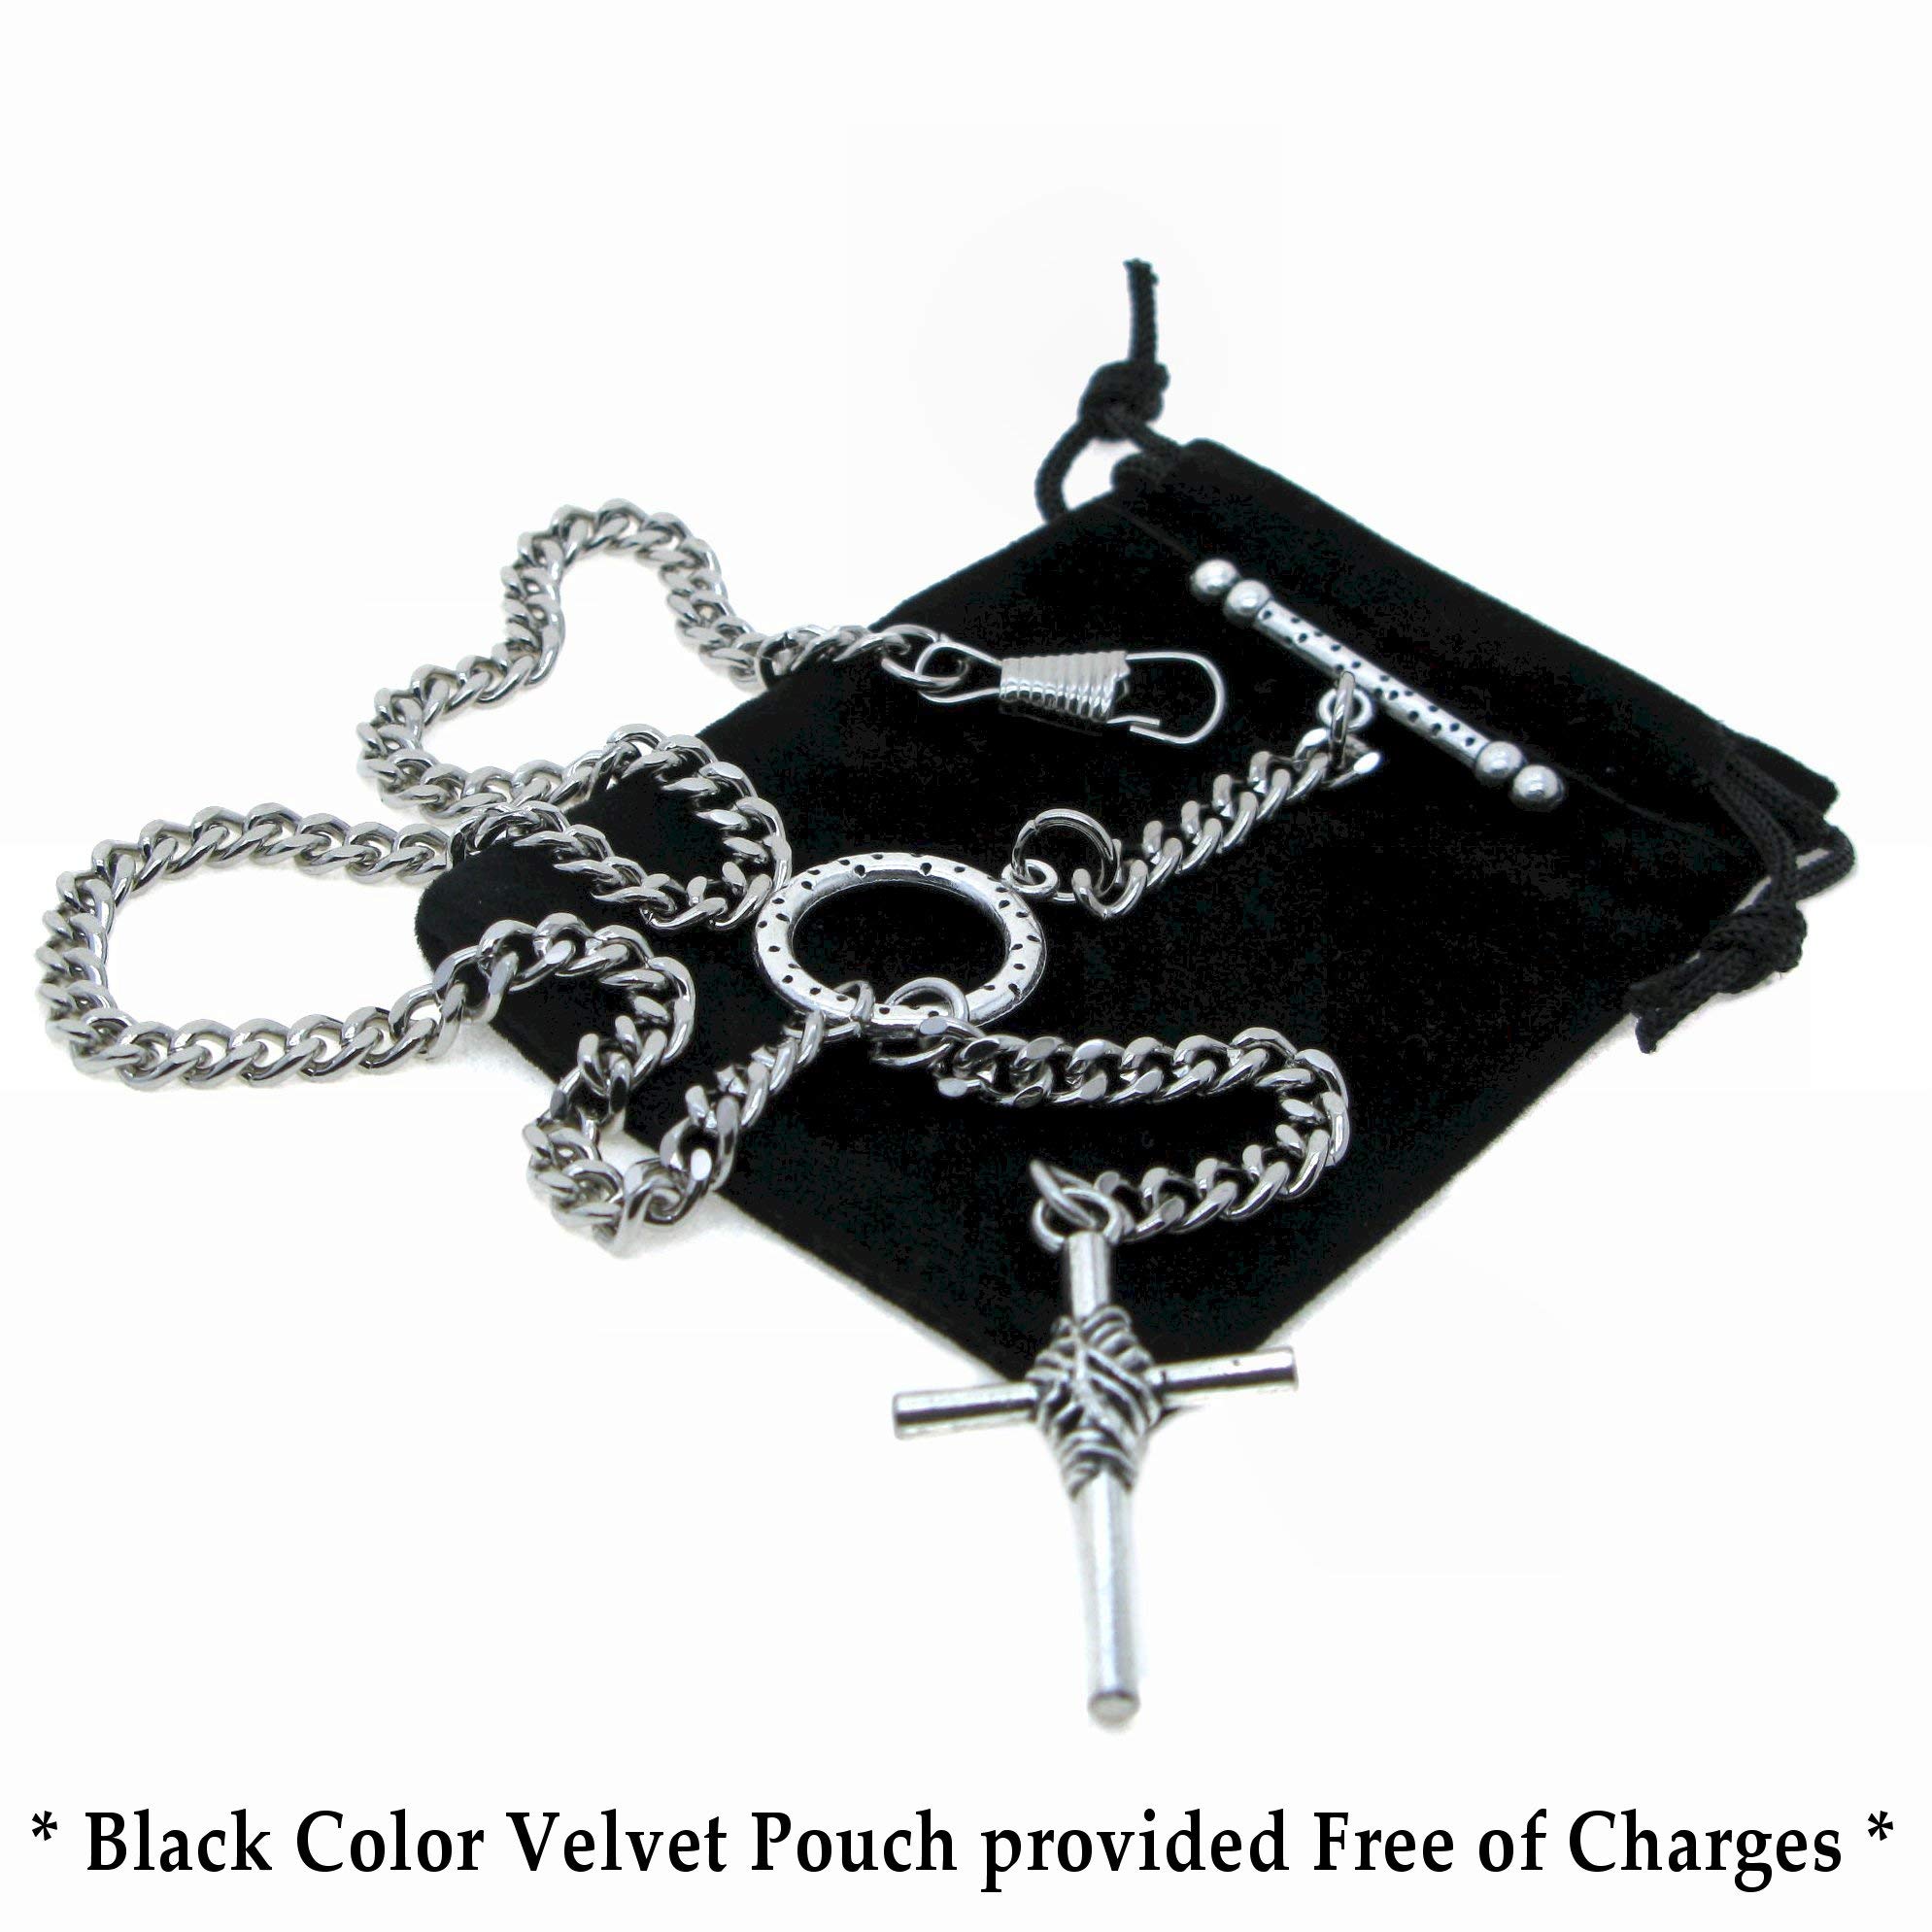 Albert Chain Silver Color Pocket Watch Chains for Men - 2 Ways Usage on Vests & Trousers or Jeans with Religious Cross Design Fob T Bar ACT76